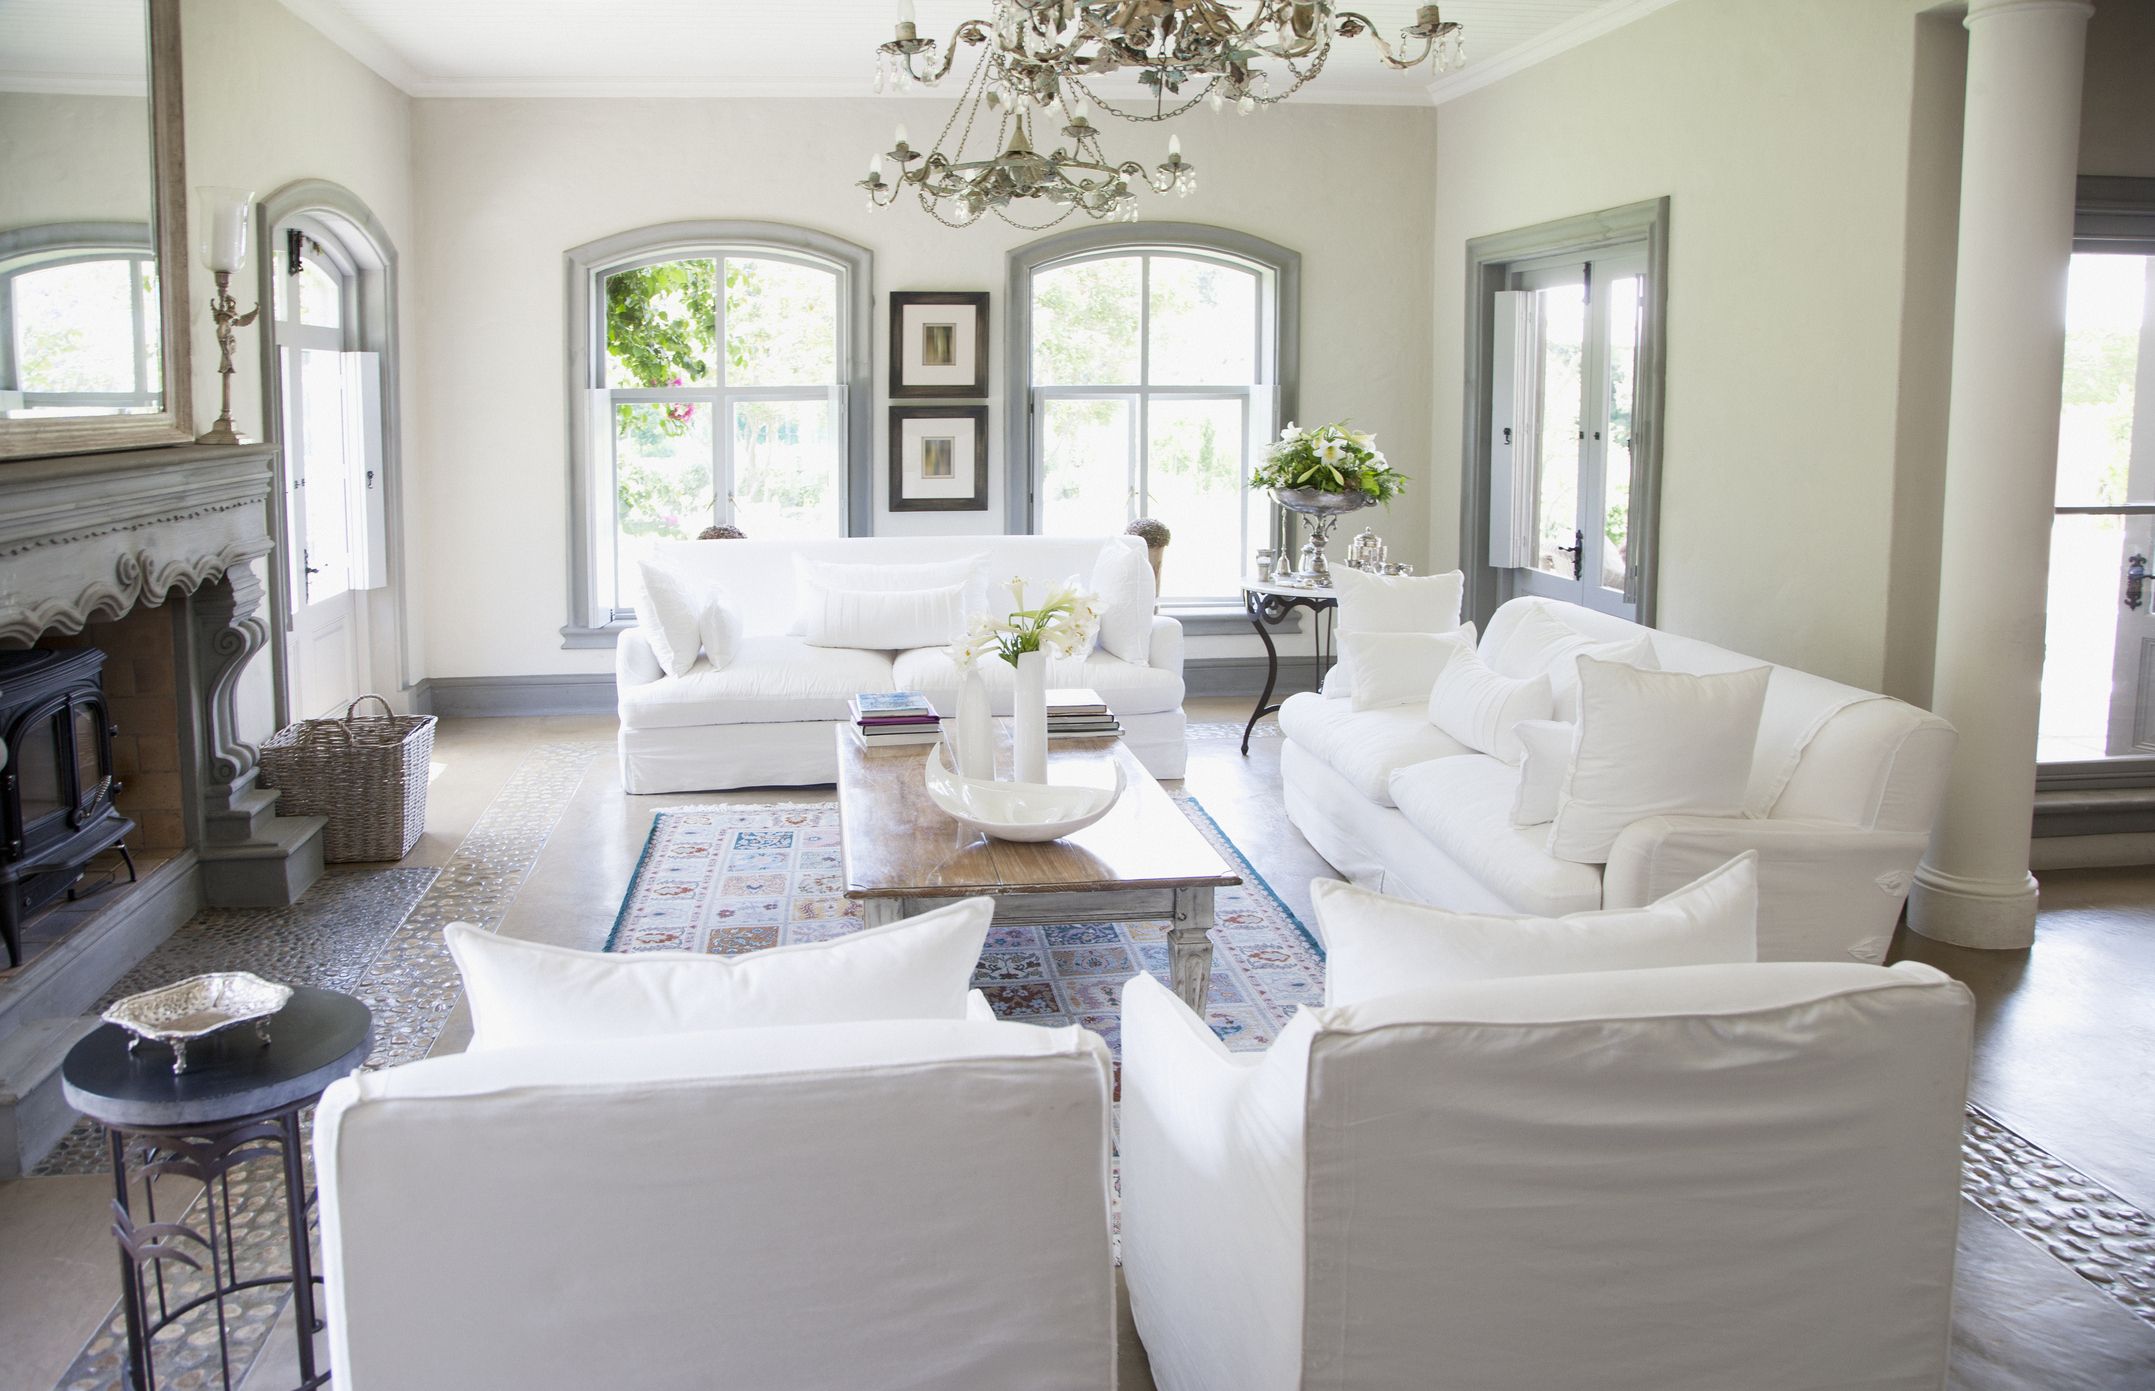 What No One Tells You About Owning A White Couch The Truth About White Furniture